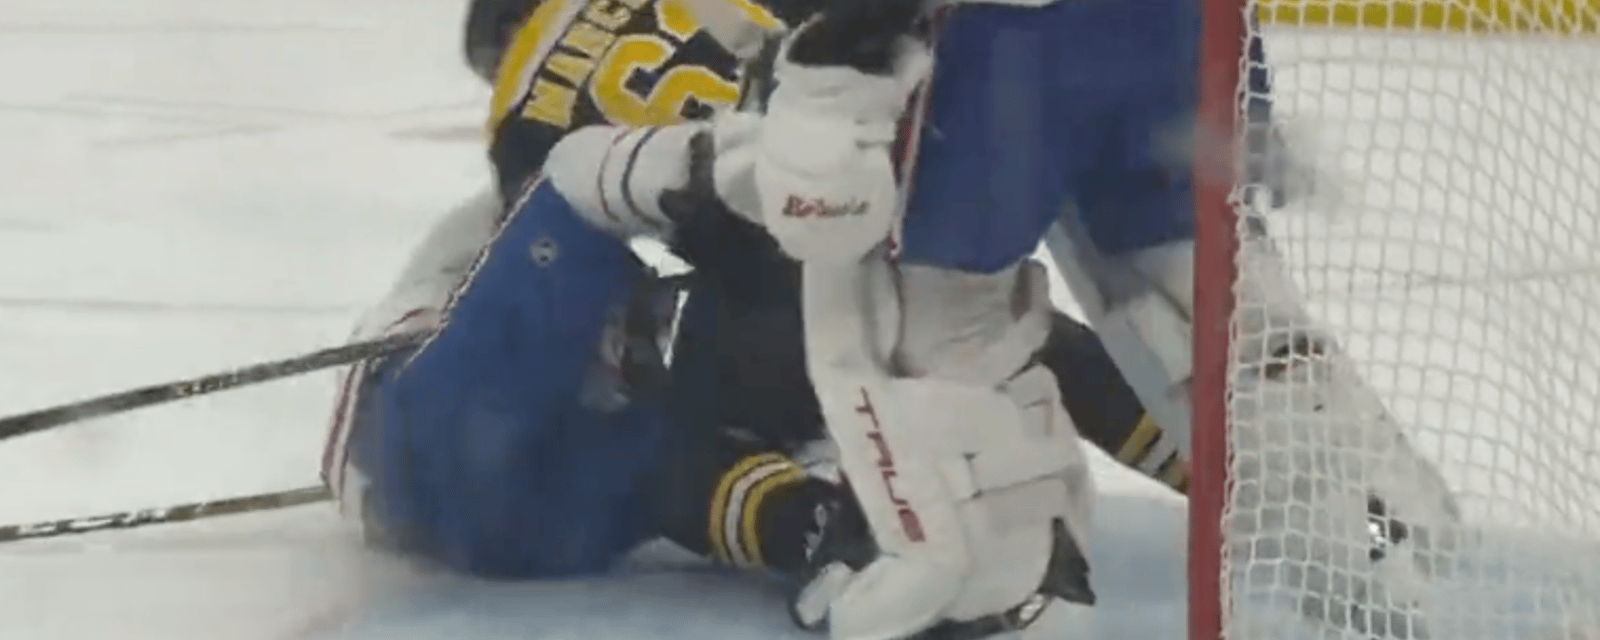 Brad Marchand avenges Patrice Bergeron after high hit